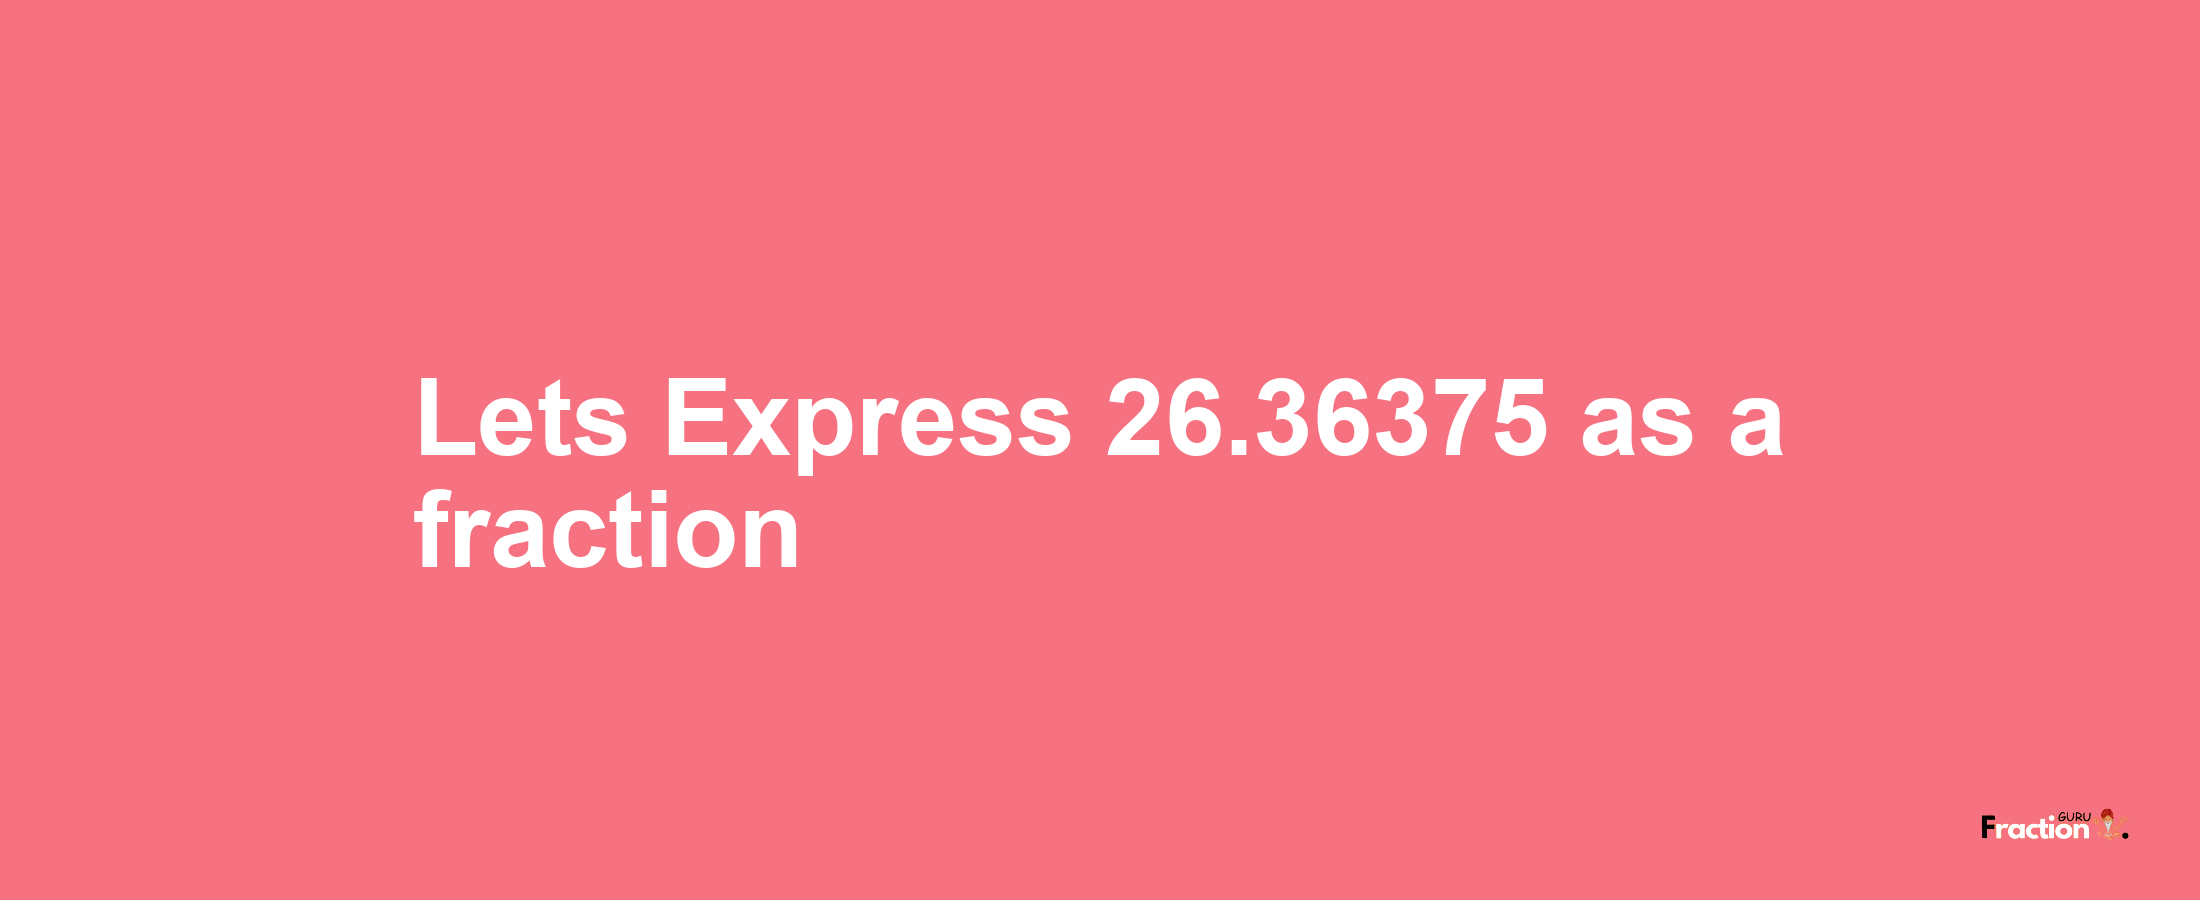 Lets Express 26.36375 as afraction